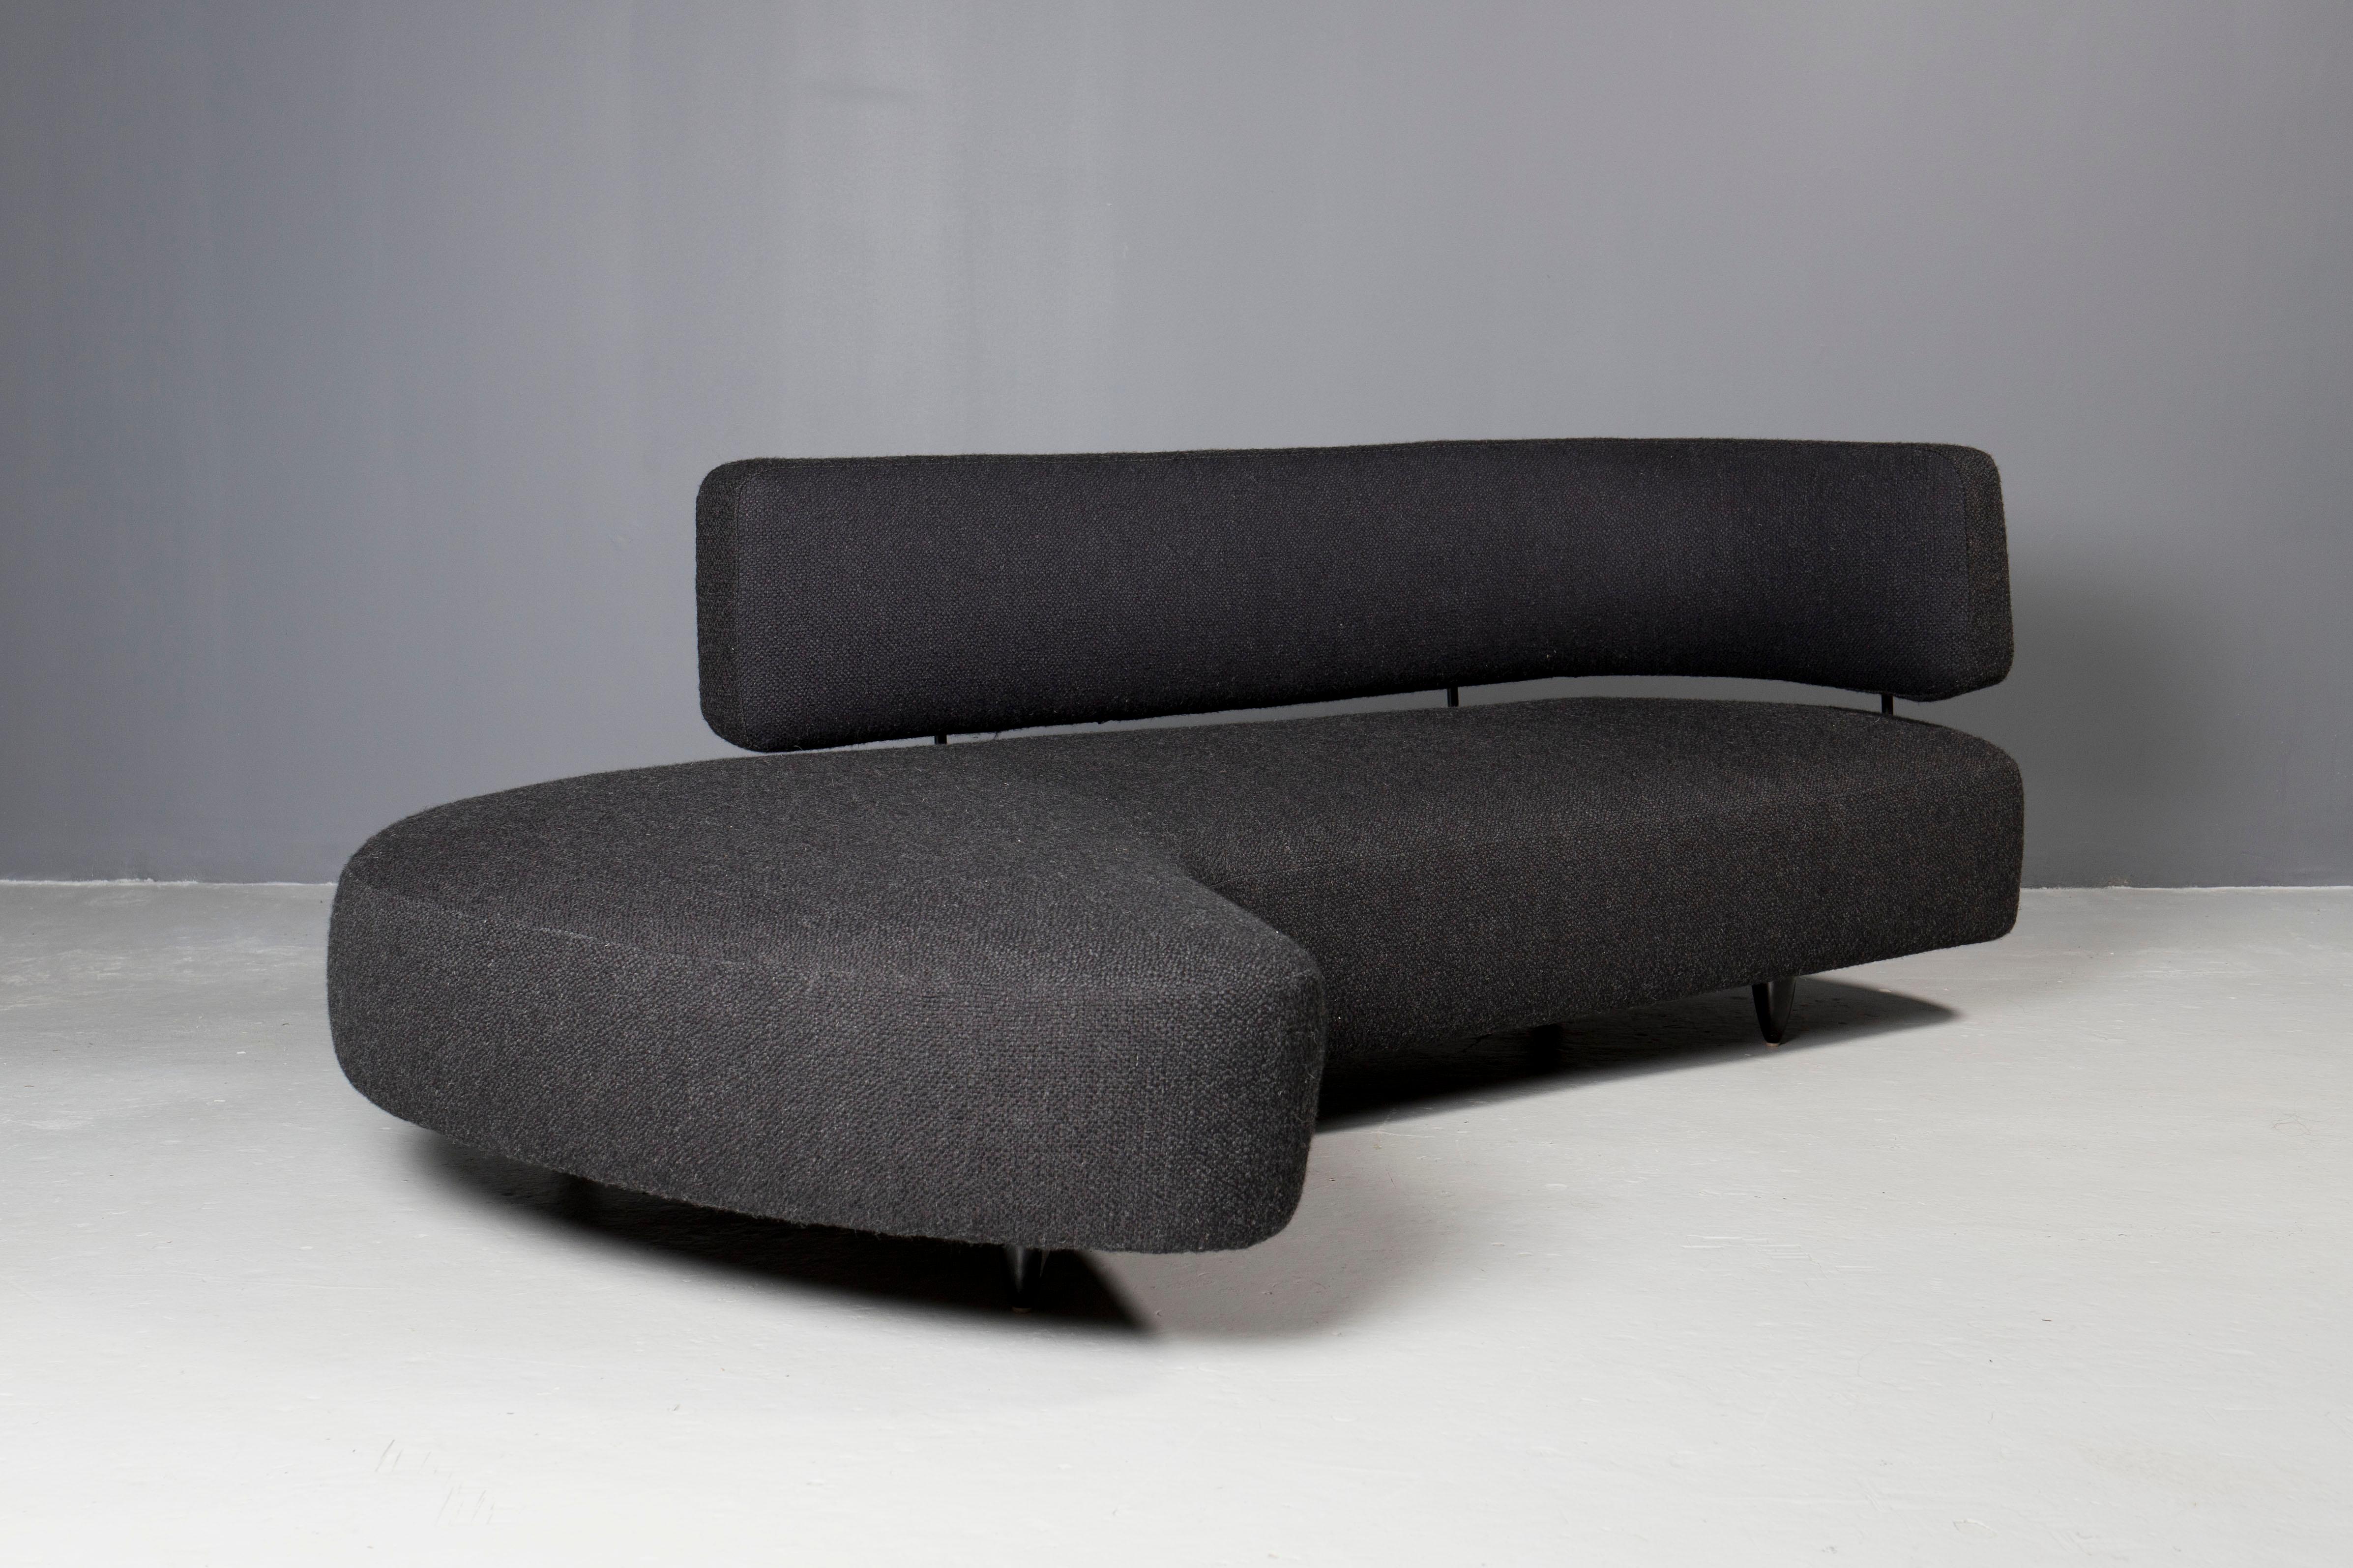 Designed by Taichiro Nakai (Japanese) for the Concorso Internazionale del Mobile in Cantú, 1954, this couch was awarded a prize by a jury including Gio Ponti, Finn Juhl, Alvar Aalto and Carlo di Carli.
Exceptional free form, characteristic for